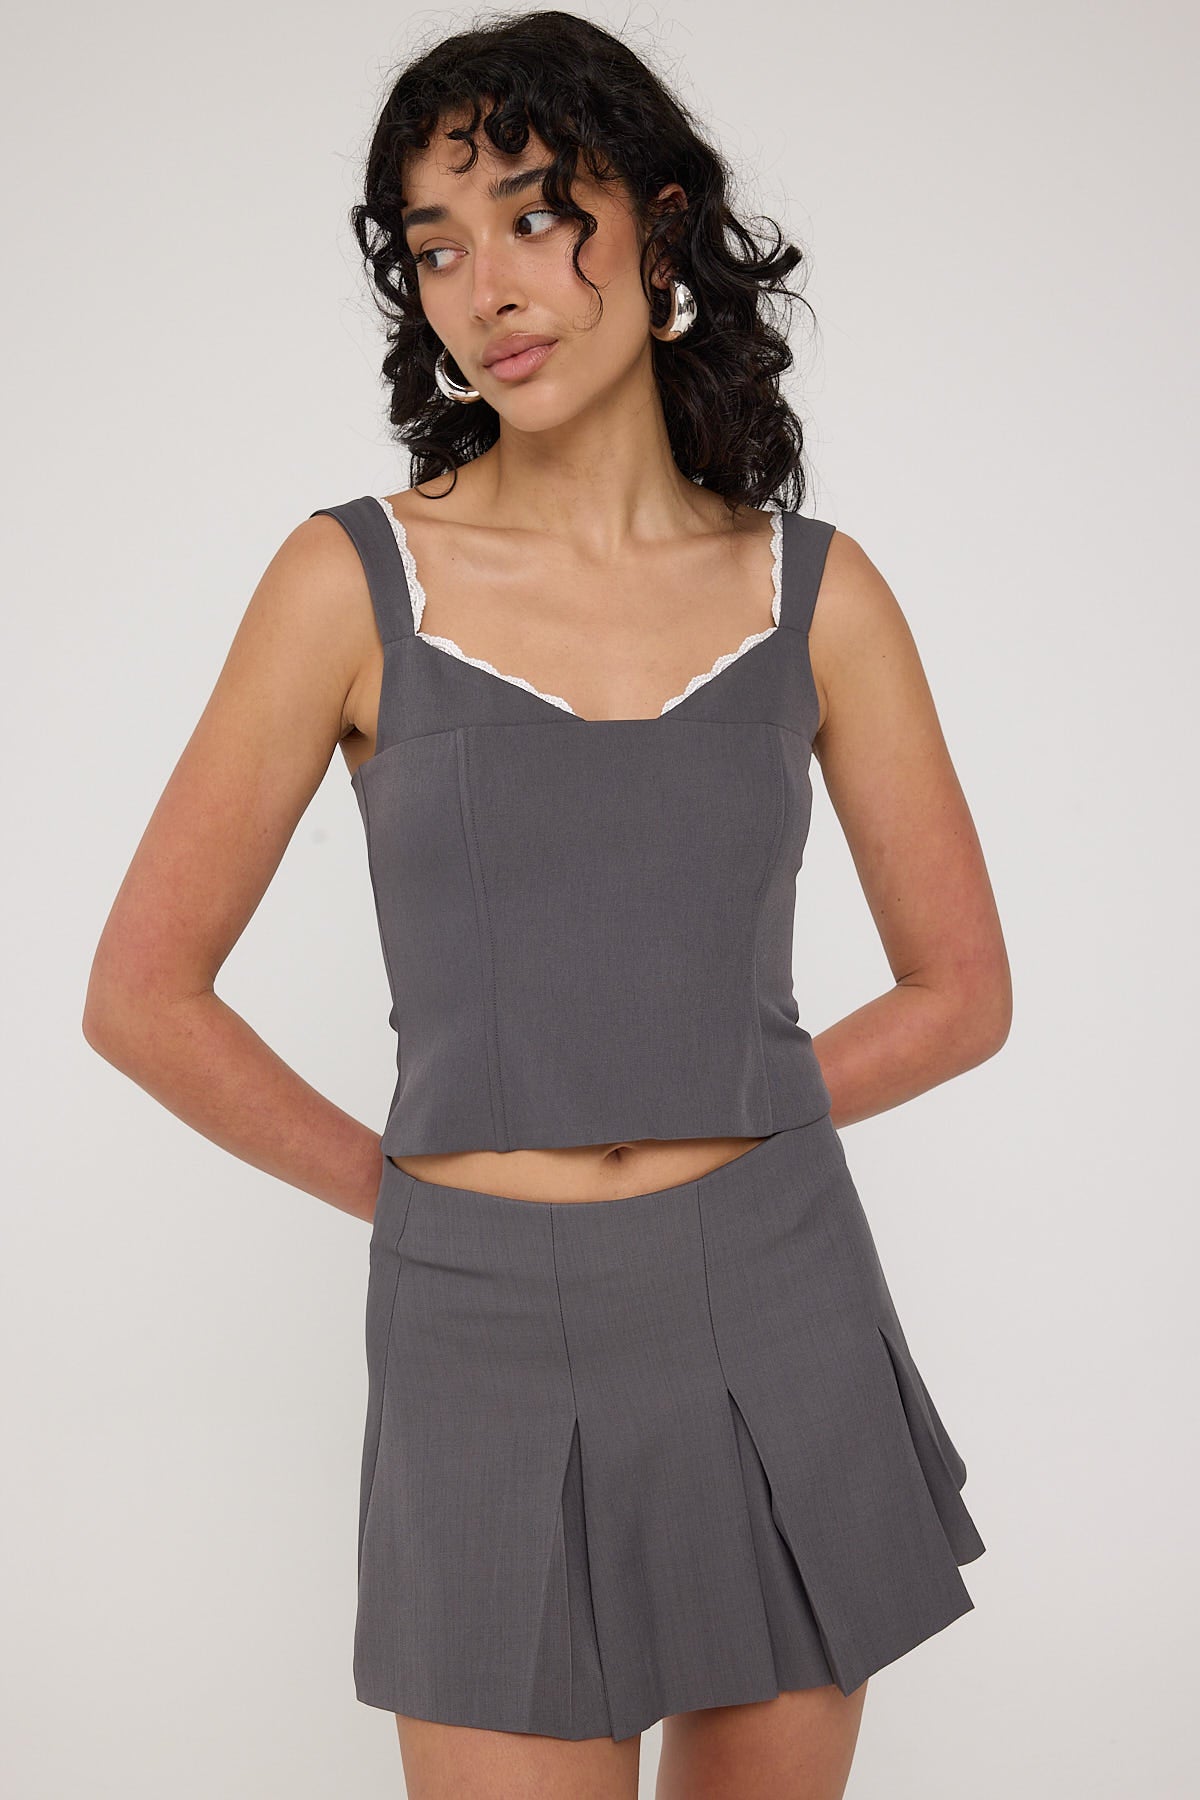 Luck & Trouble Model Me Lace Back Corset Top Grey